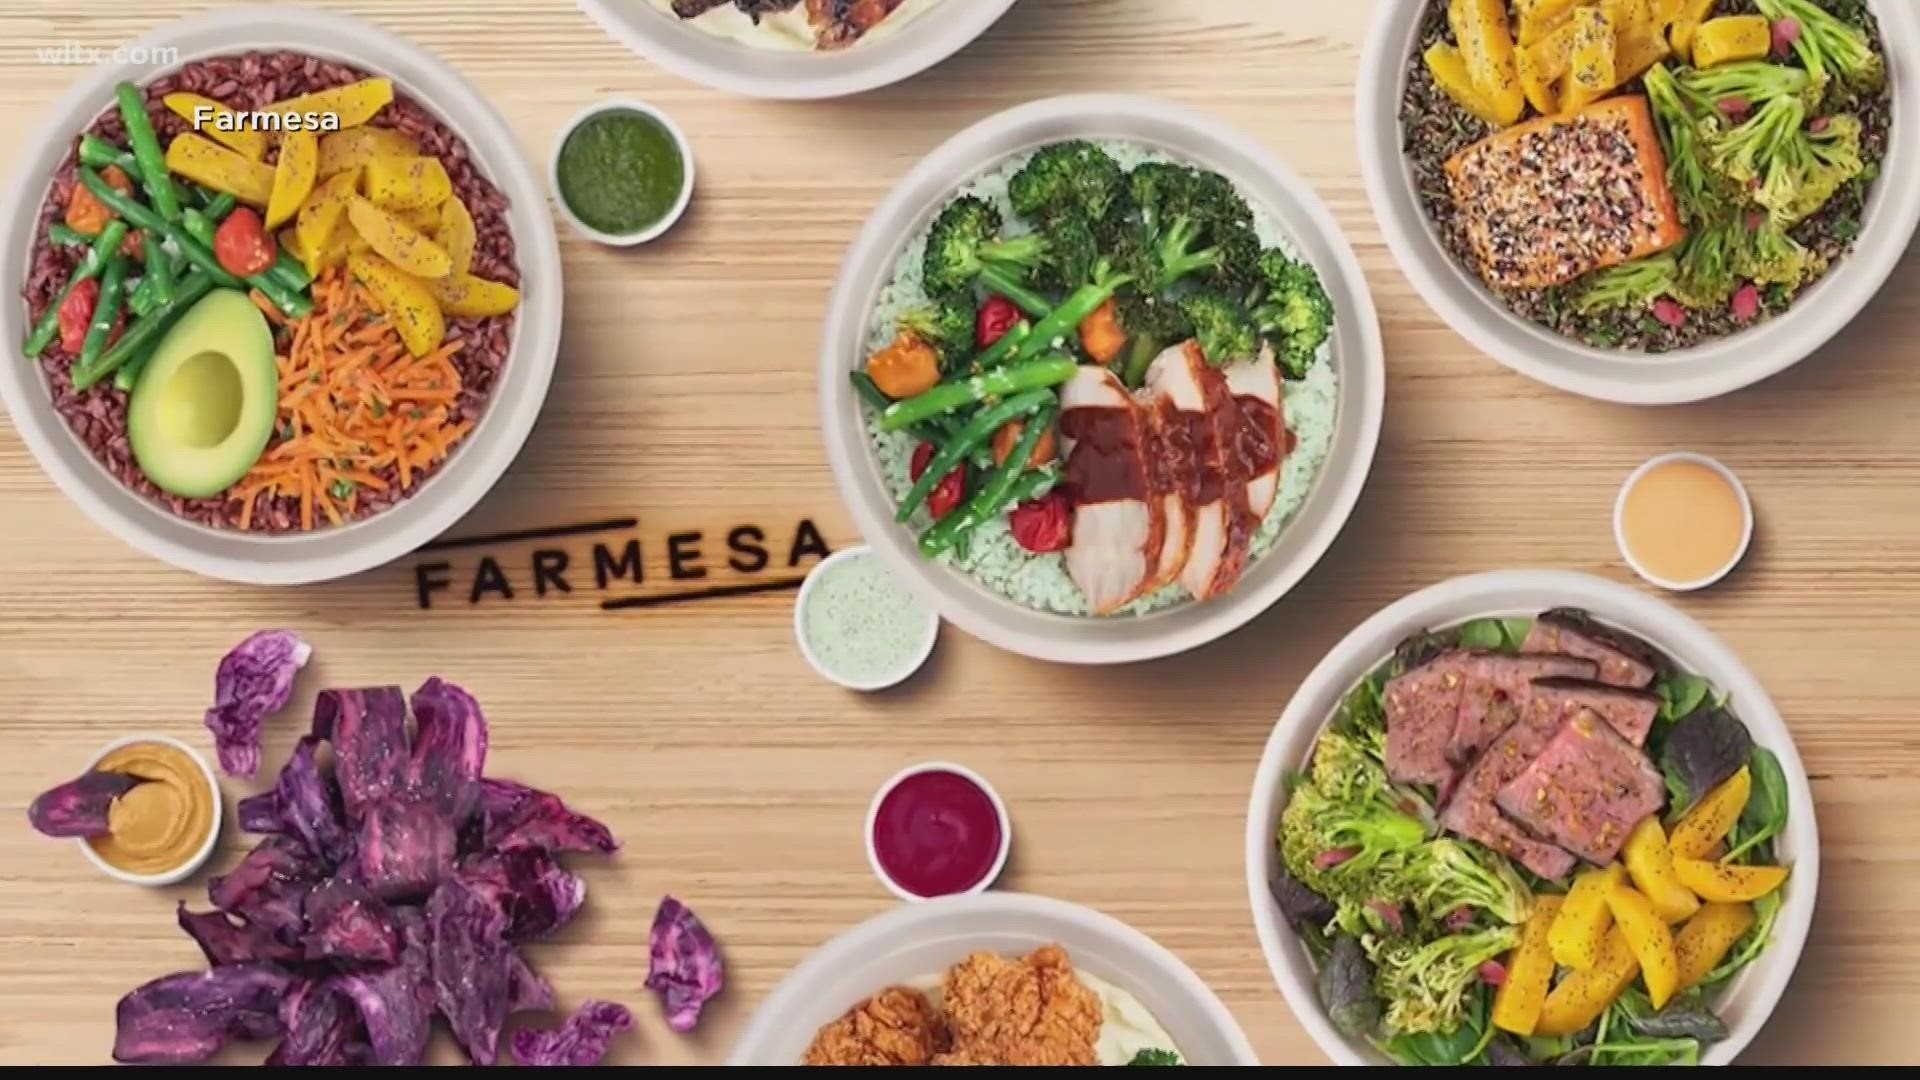 Chipotle Mexican Grill is launching a spinoff restaurant, Farmesa, that will serve up customizable bowls focusing on healthier foods.